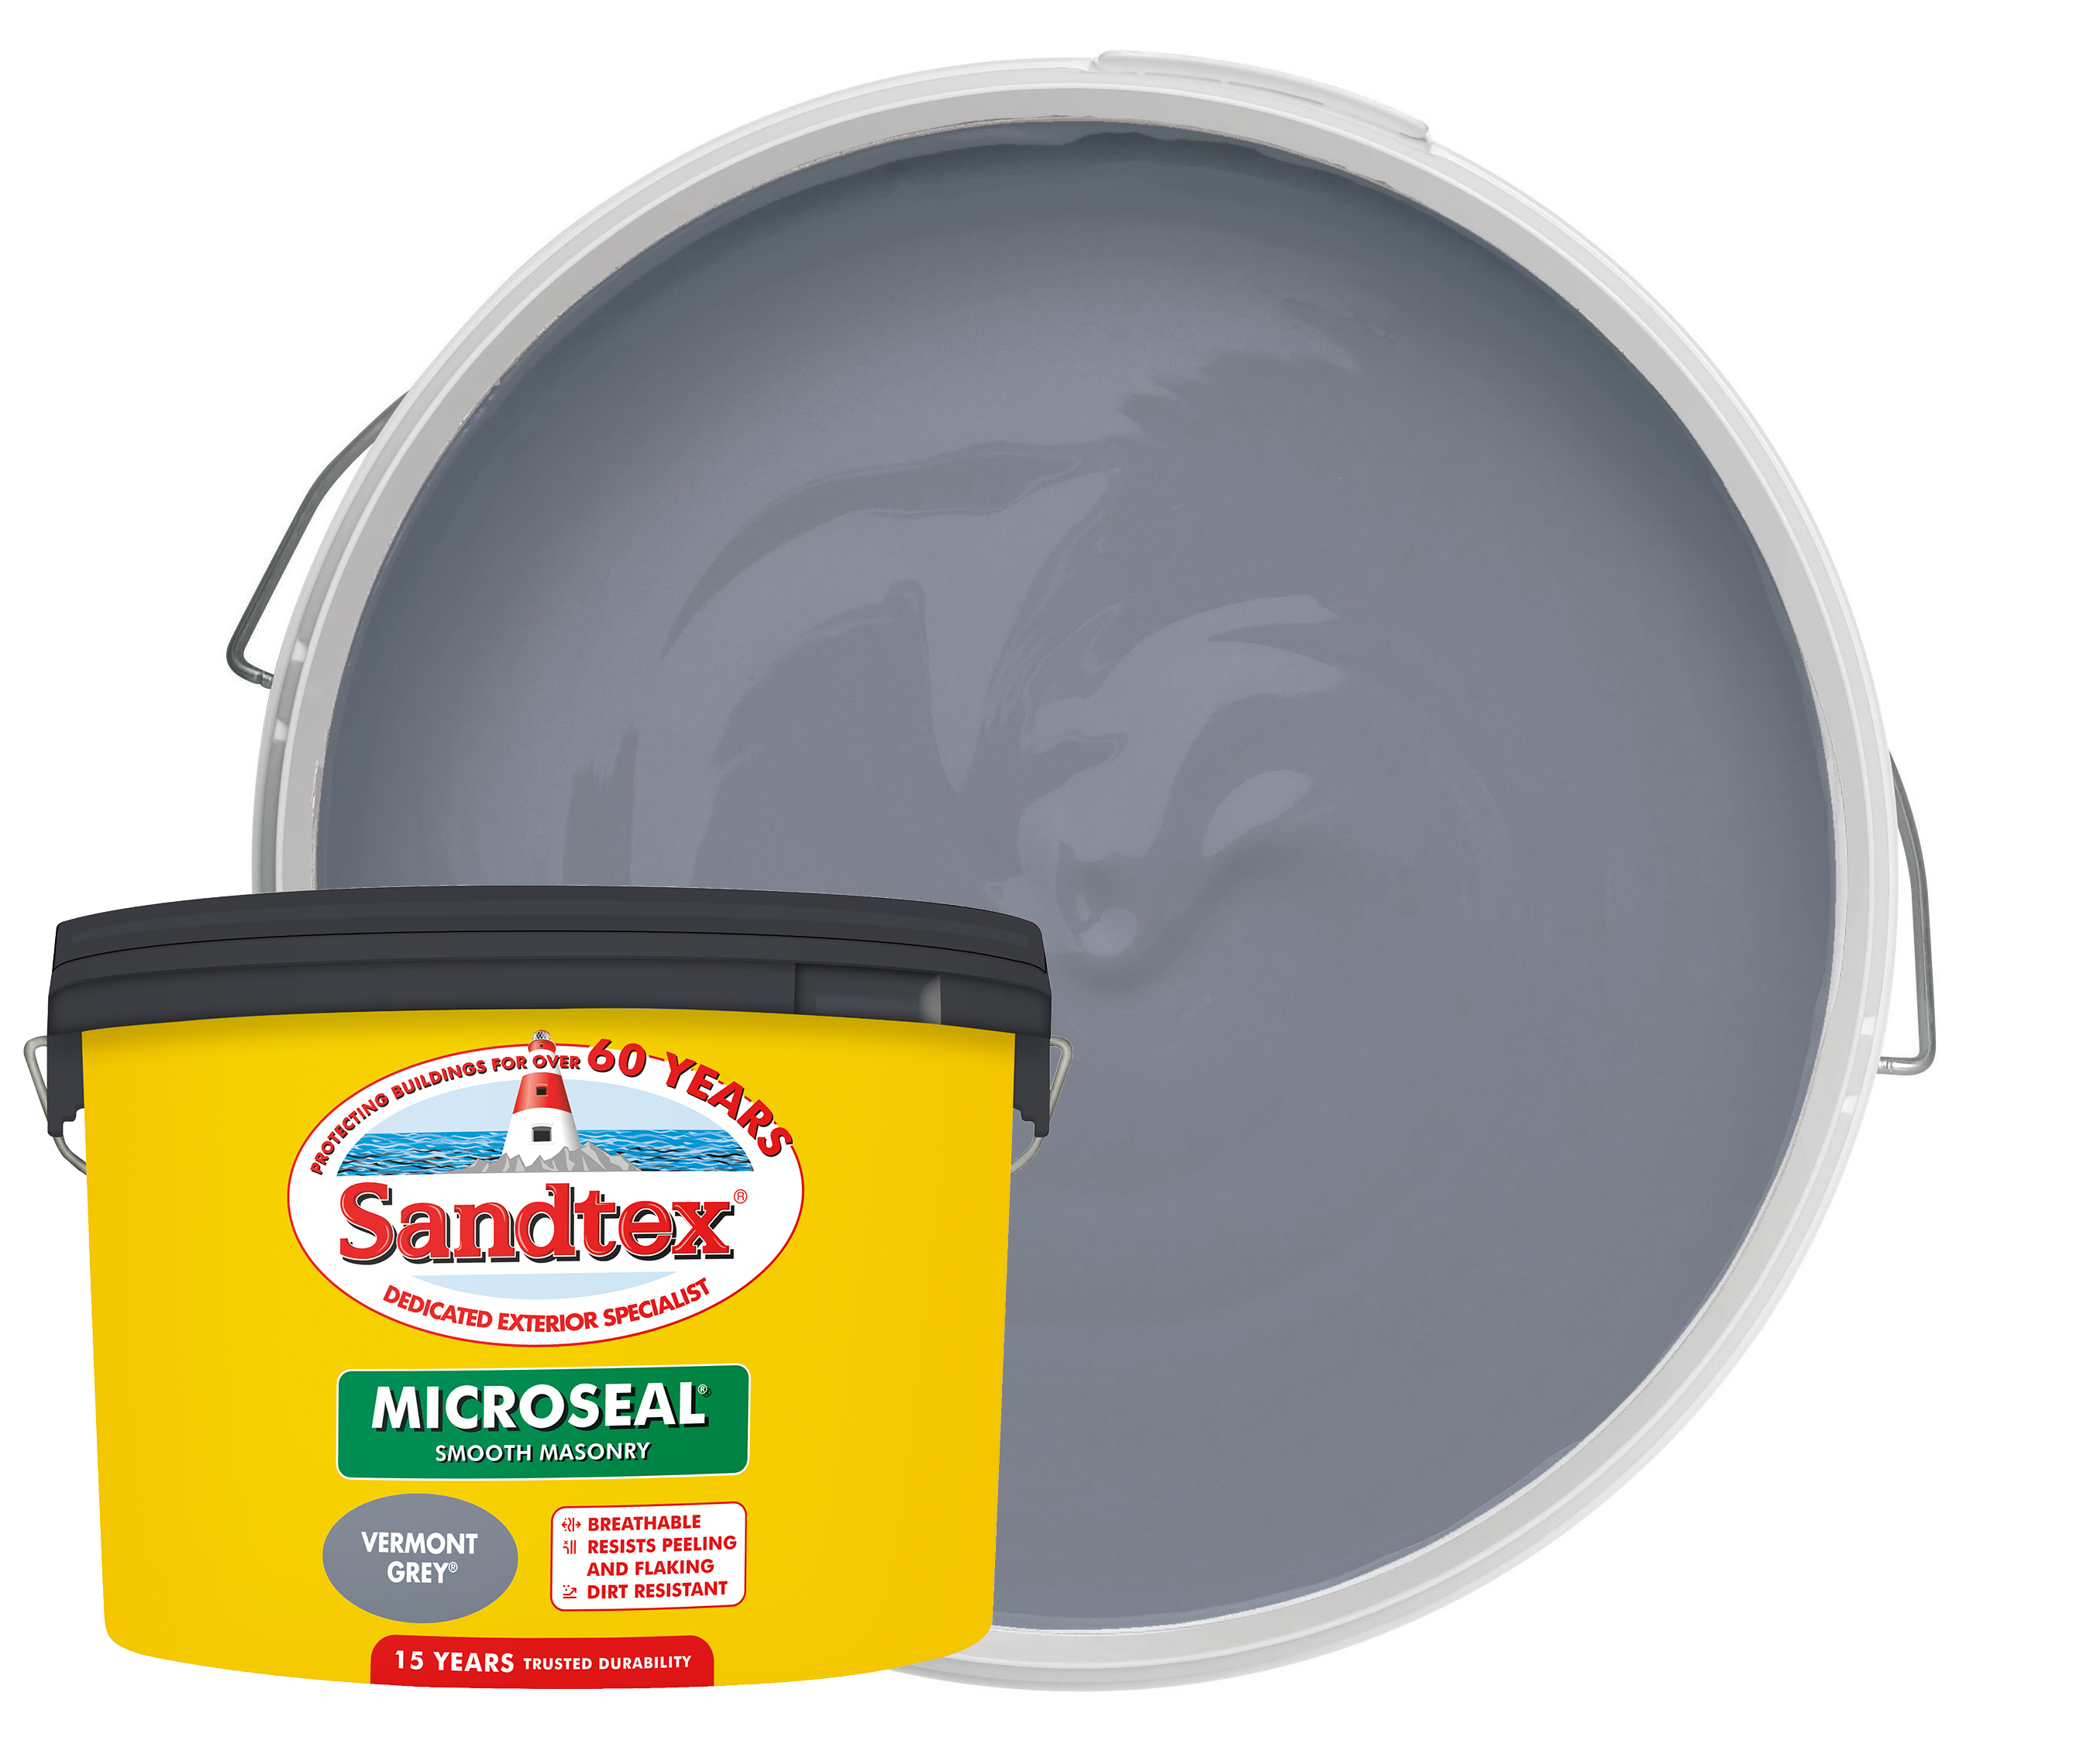 Image of Sandtex Microseal Ultra Smooth Weatherproof Masonry 15 Year Exterior Wall Paint - Vermont Grey - 10L